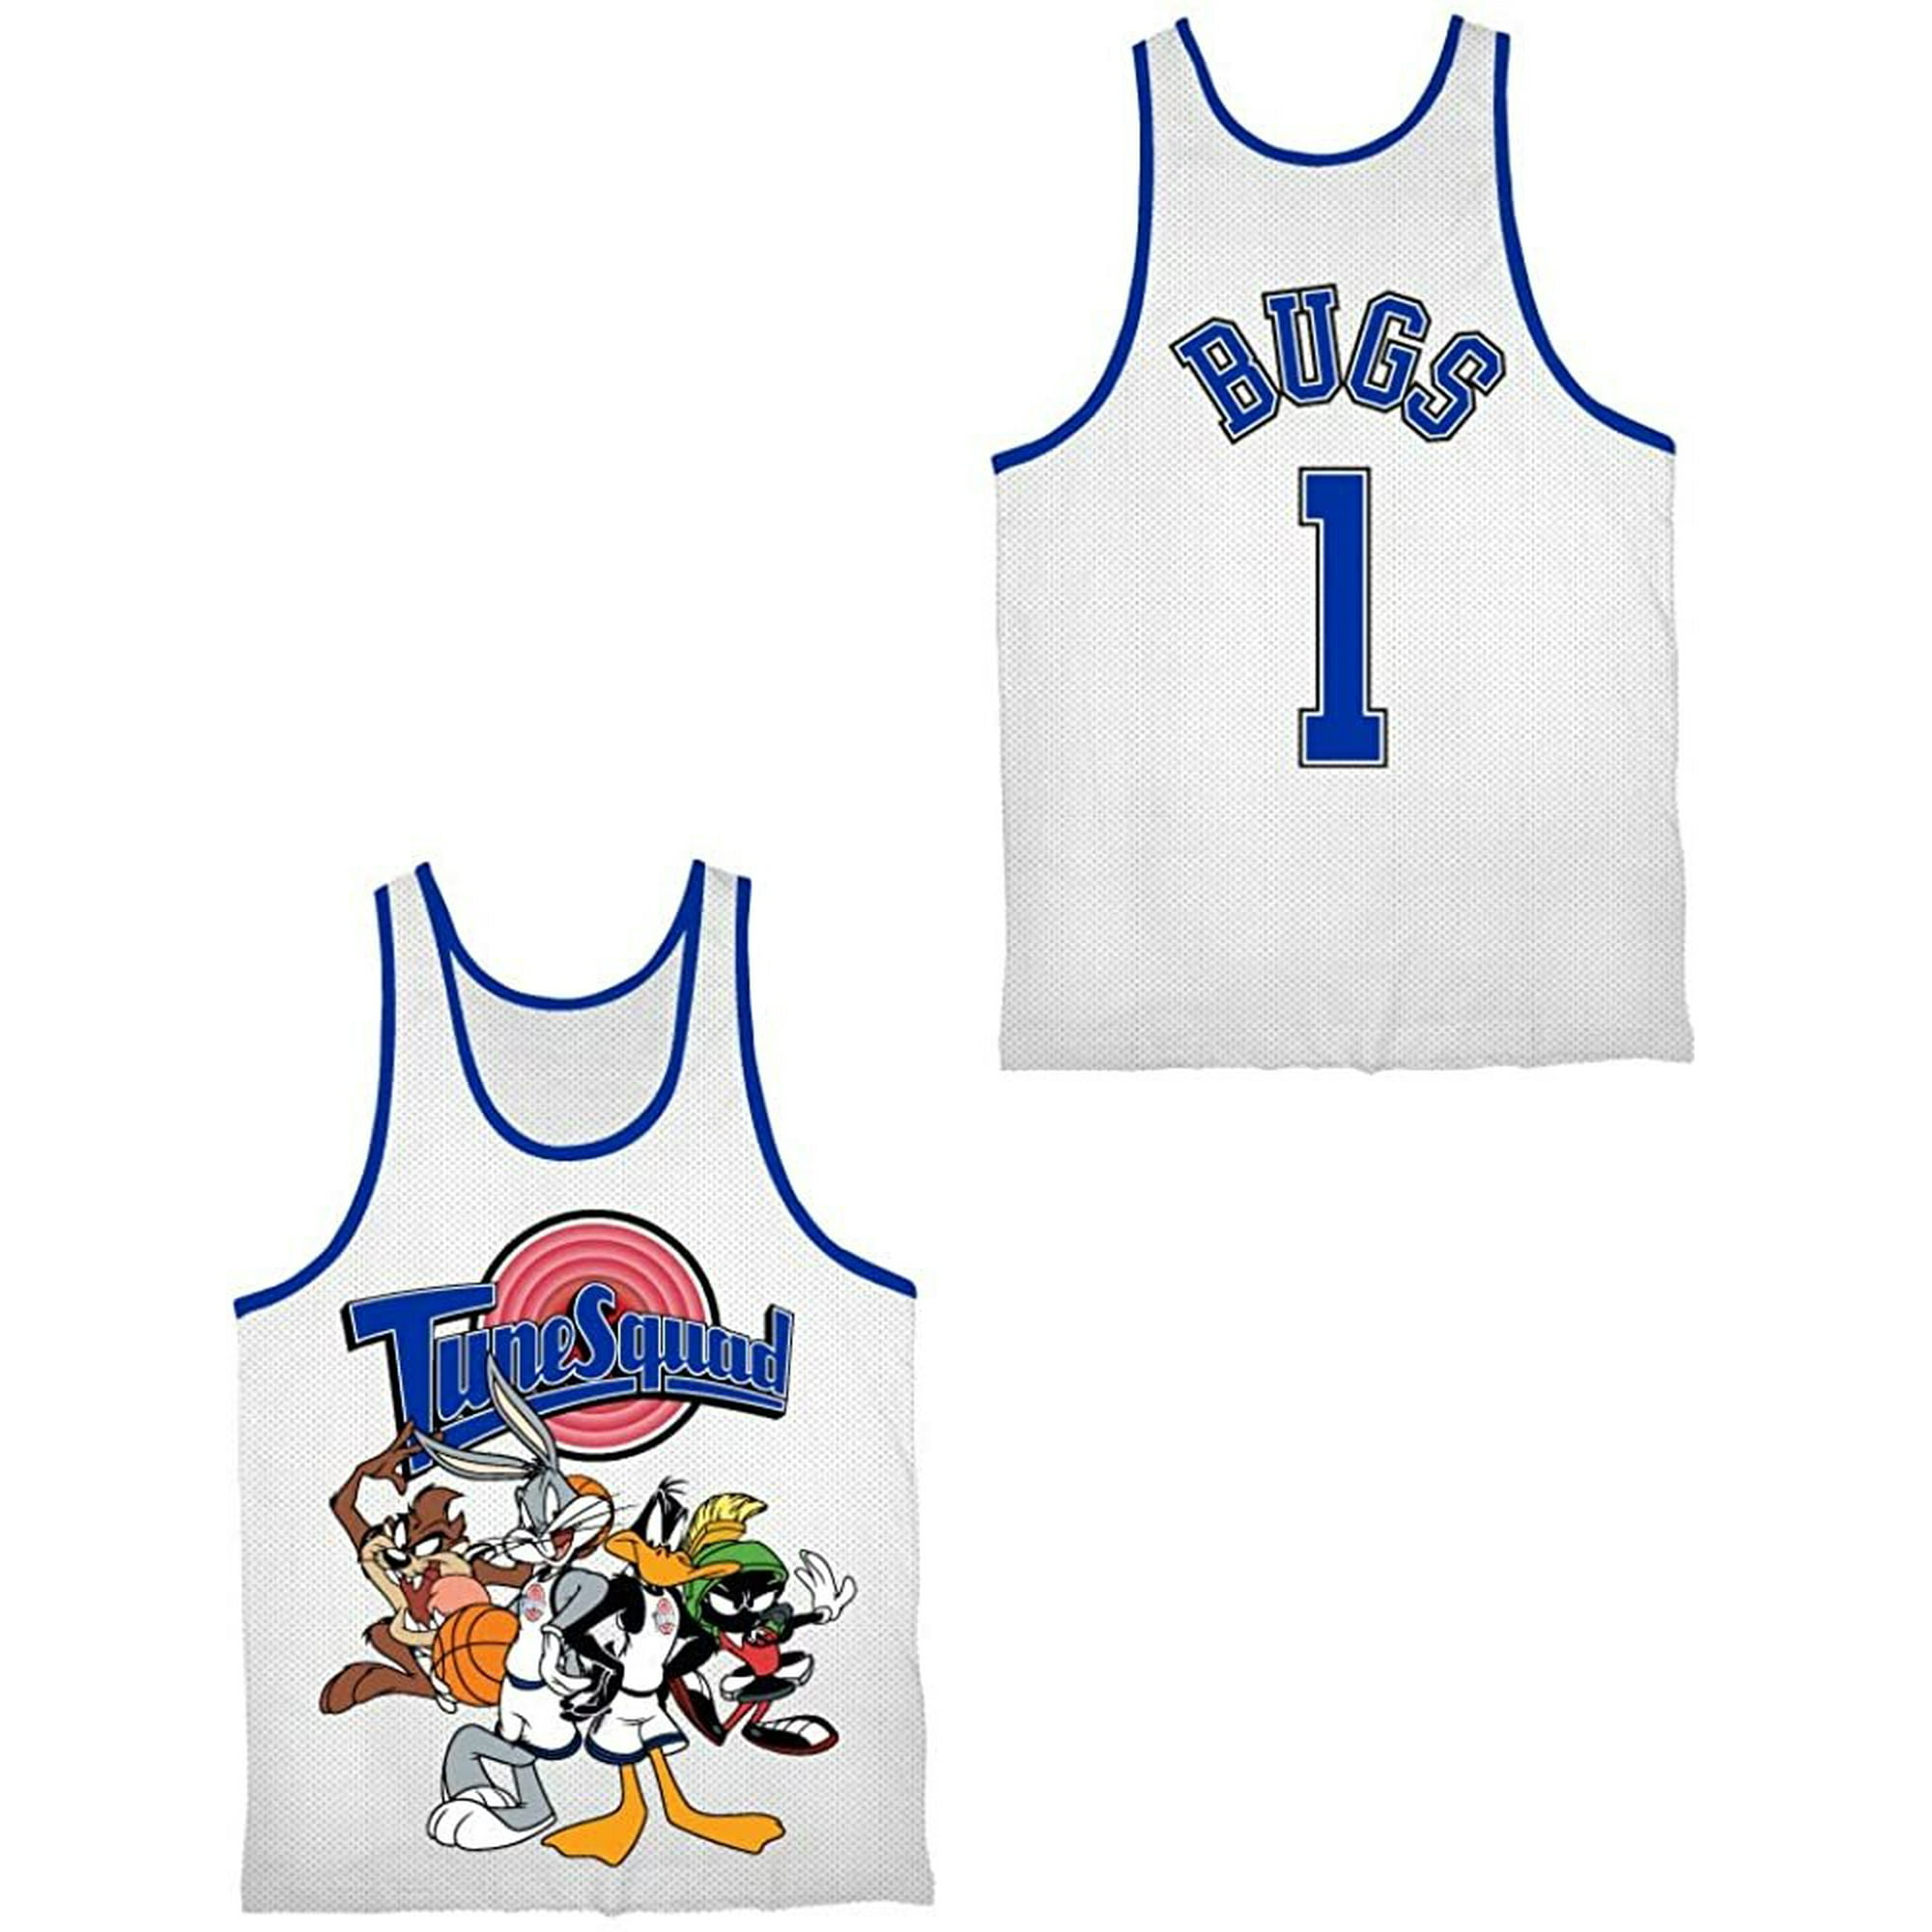 Looney Tunes Basketball Active Jerseys for Men